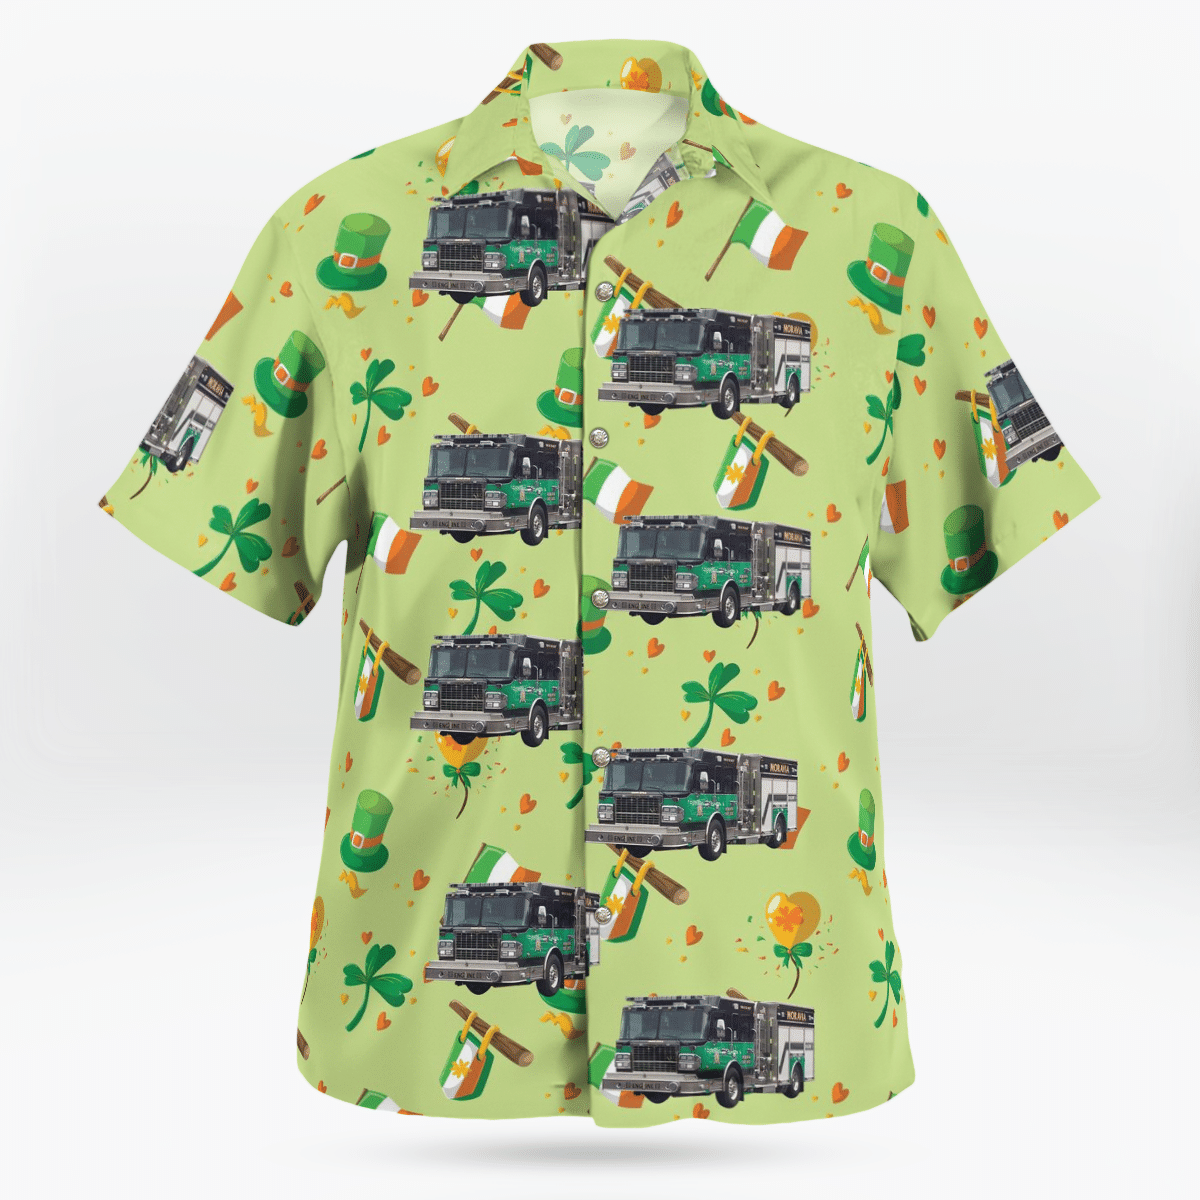 Hawaiian shirts never go out of style 62